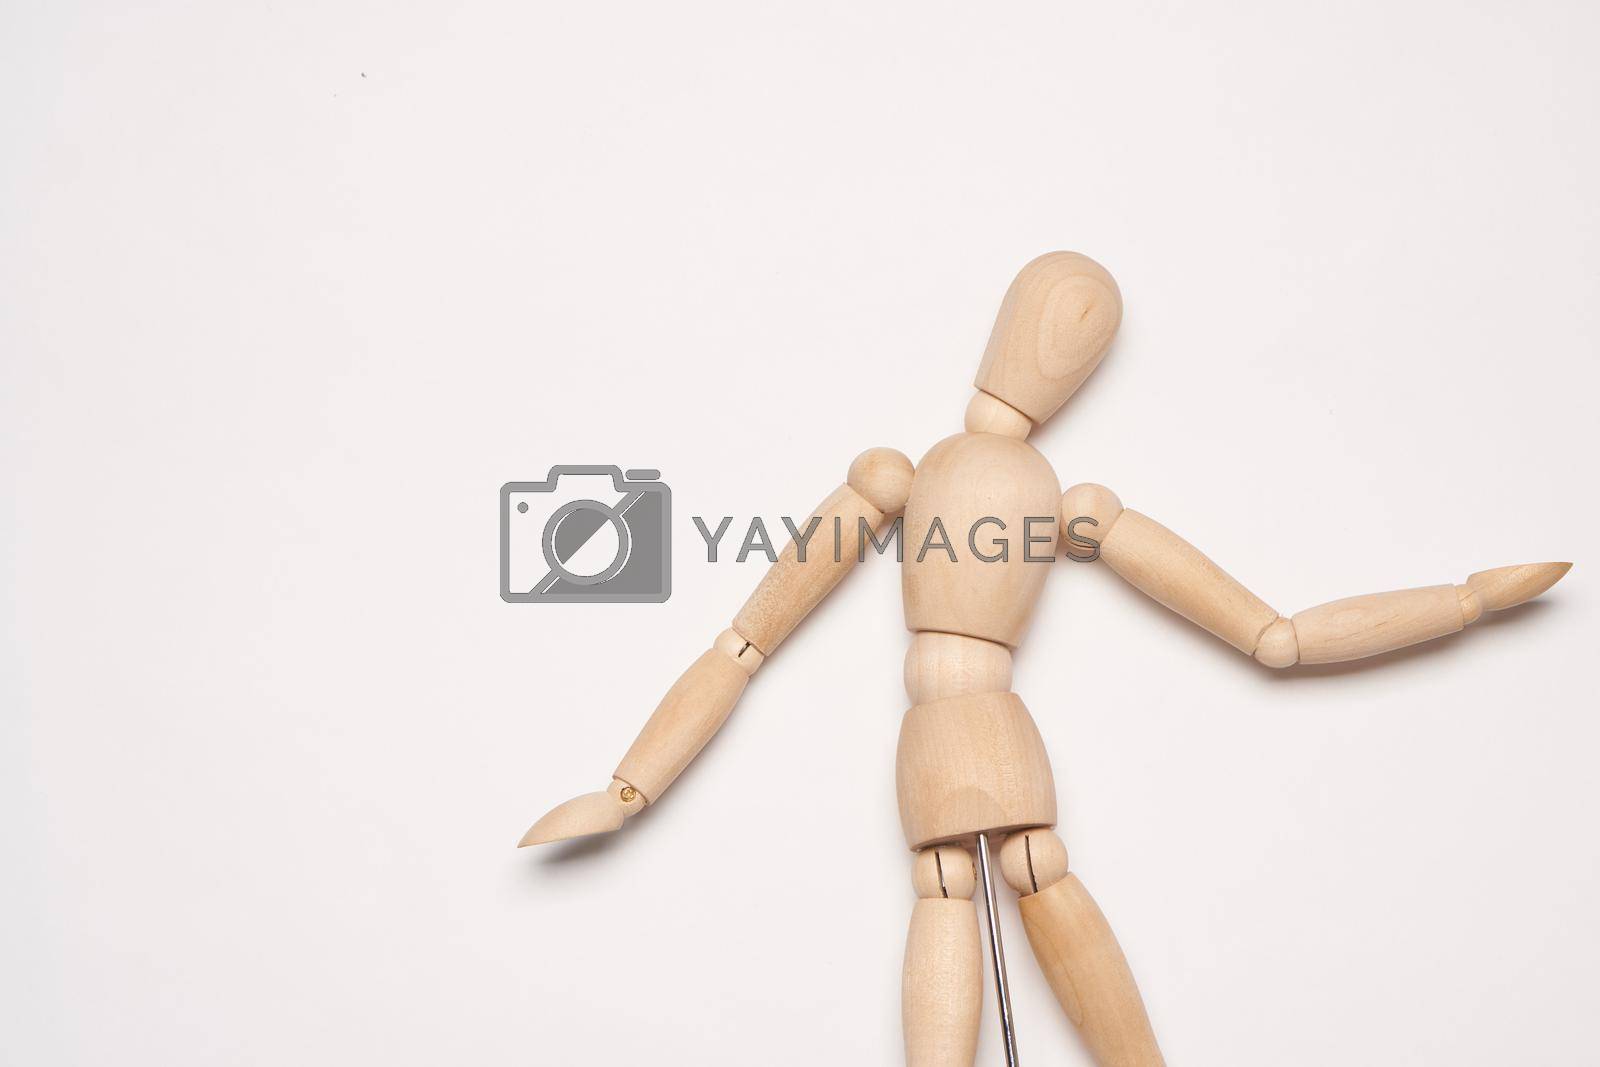 Royalty free image of wooden mannequin object close up light background by Vichizh